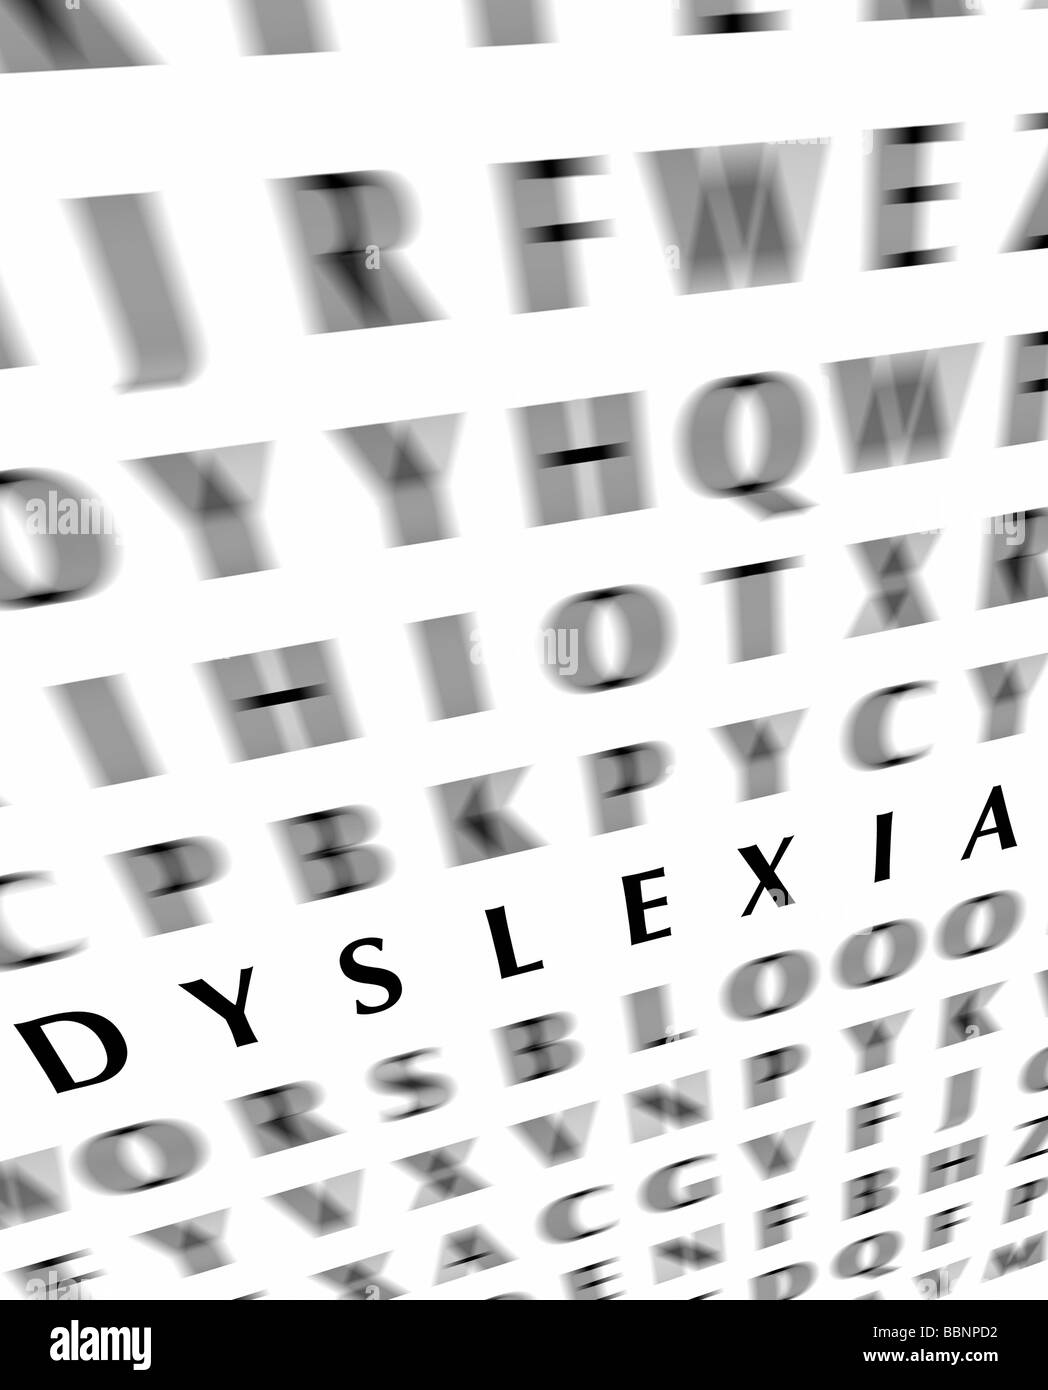 DYSLEXIA CONCEPT The word Dyslexia with random blurred letters on white background. Illustration Stock Photo